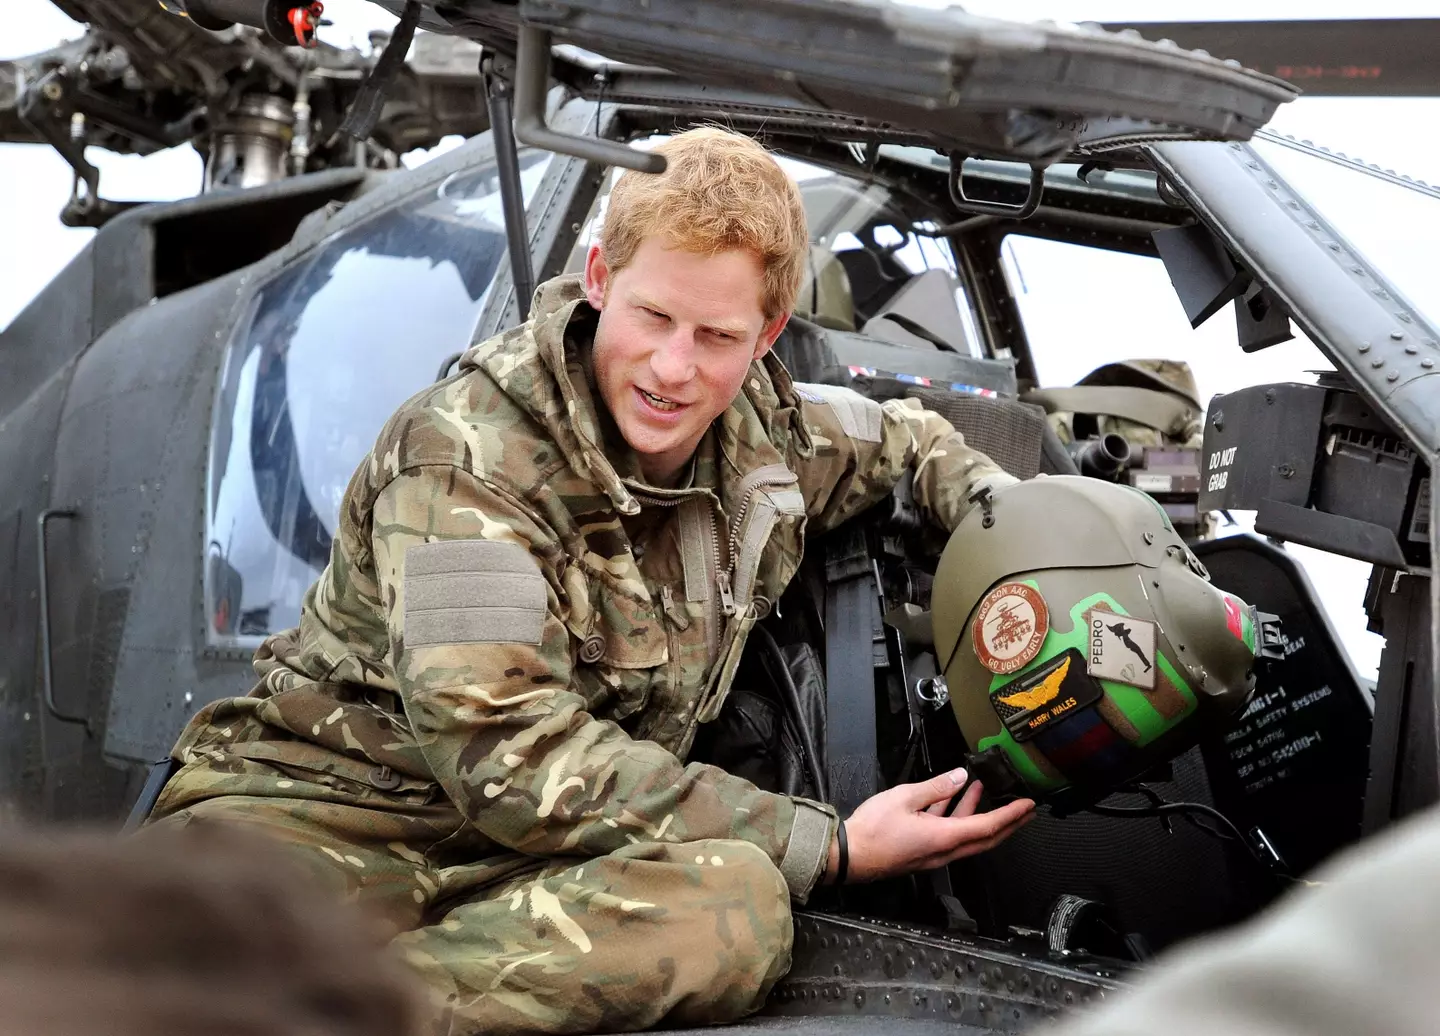 Prince Harry wrote about his time in Afghanistan in his book, Spare.